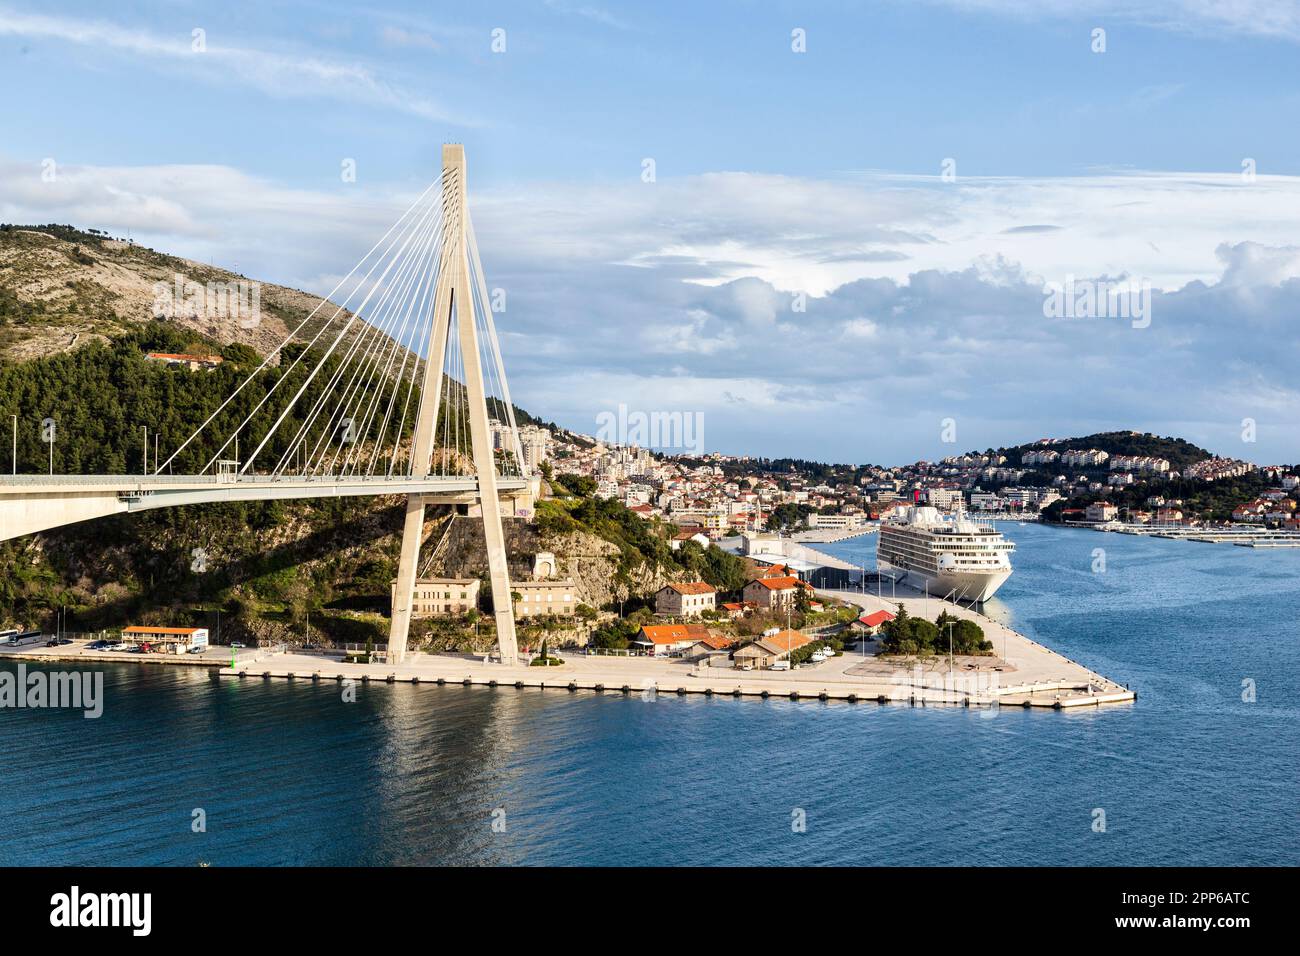 Franjo Tuđman Bridge, Dubrovnik, Croatia, a cable-stayed bridge opened in 2002 and Dubrovnik Harbour, with a cruise liner moored up. Stock Photo